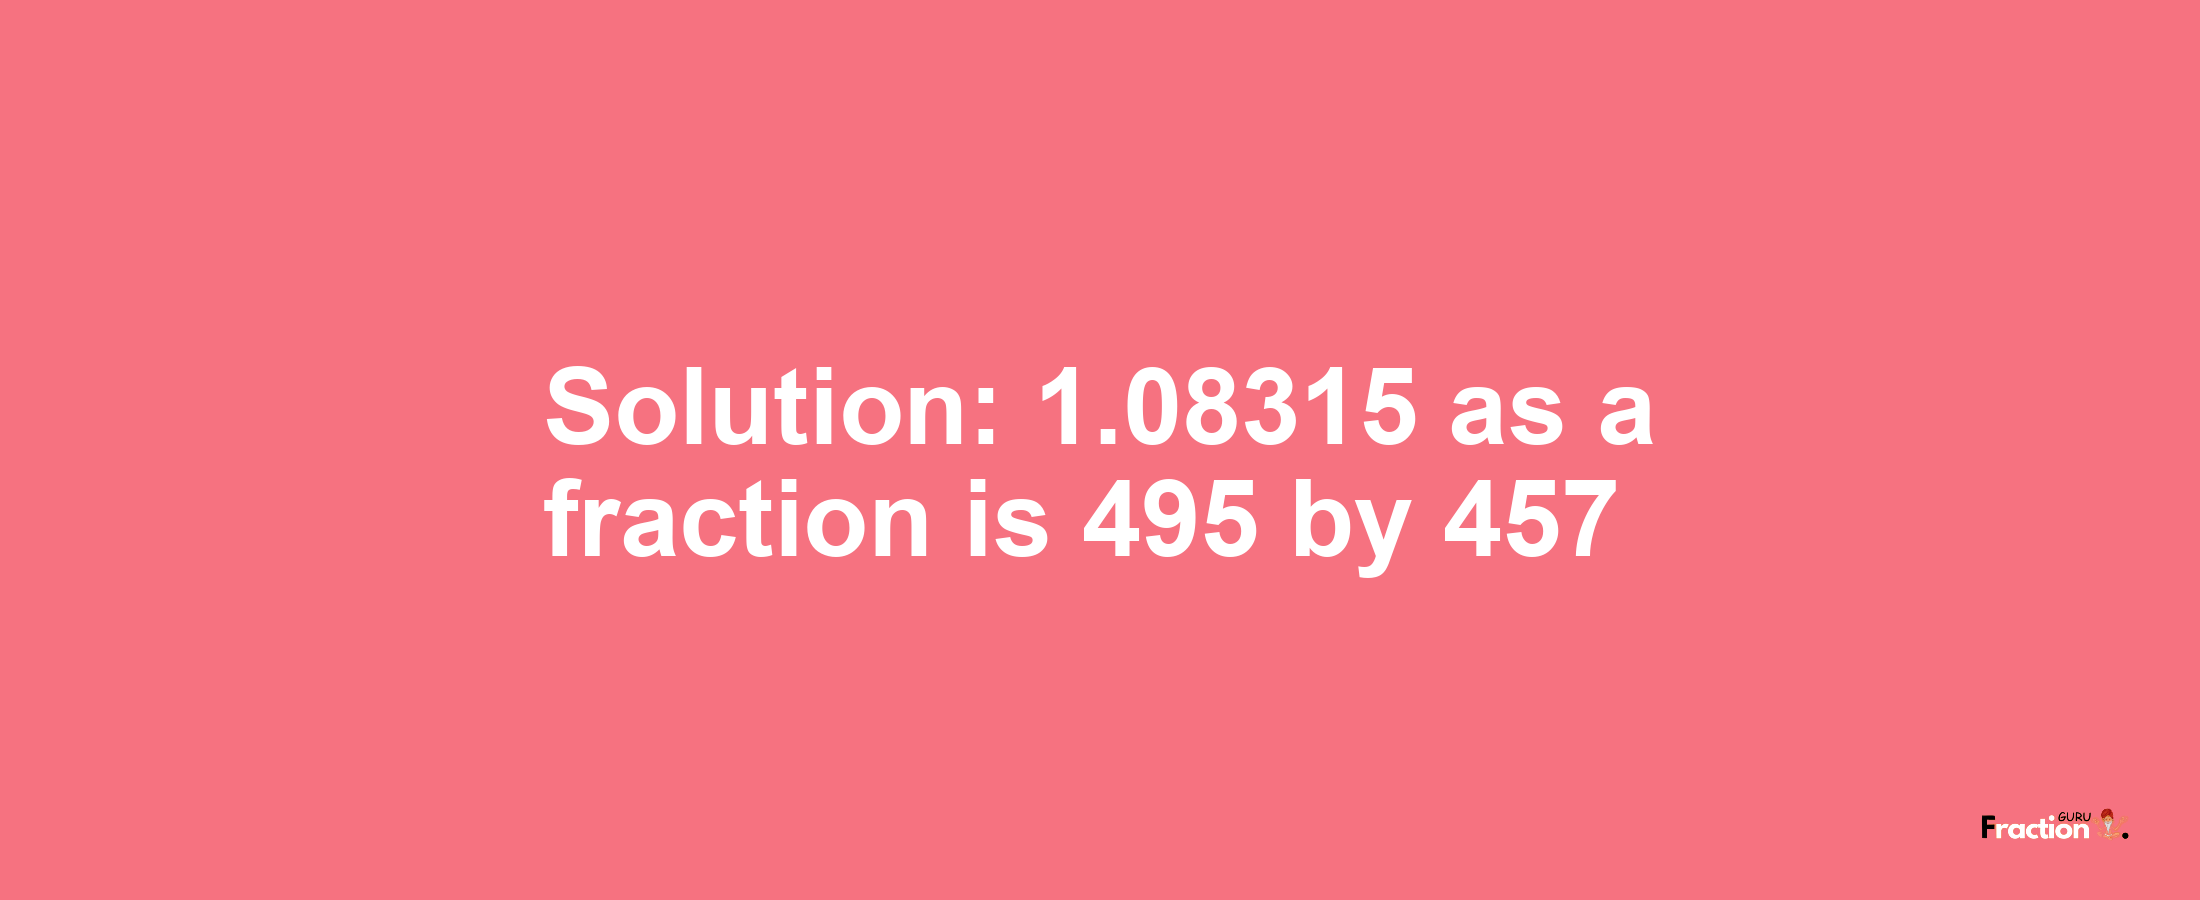 Solution:1.08315 as a fraction is 495/457